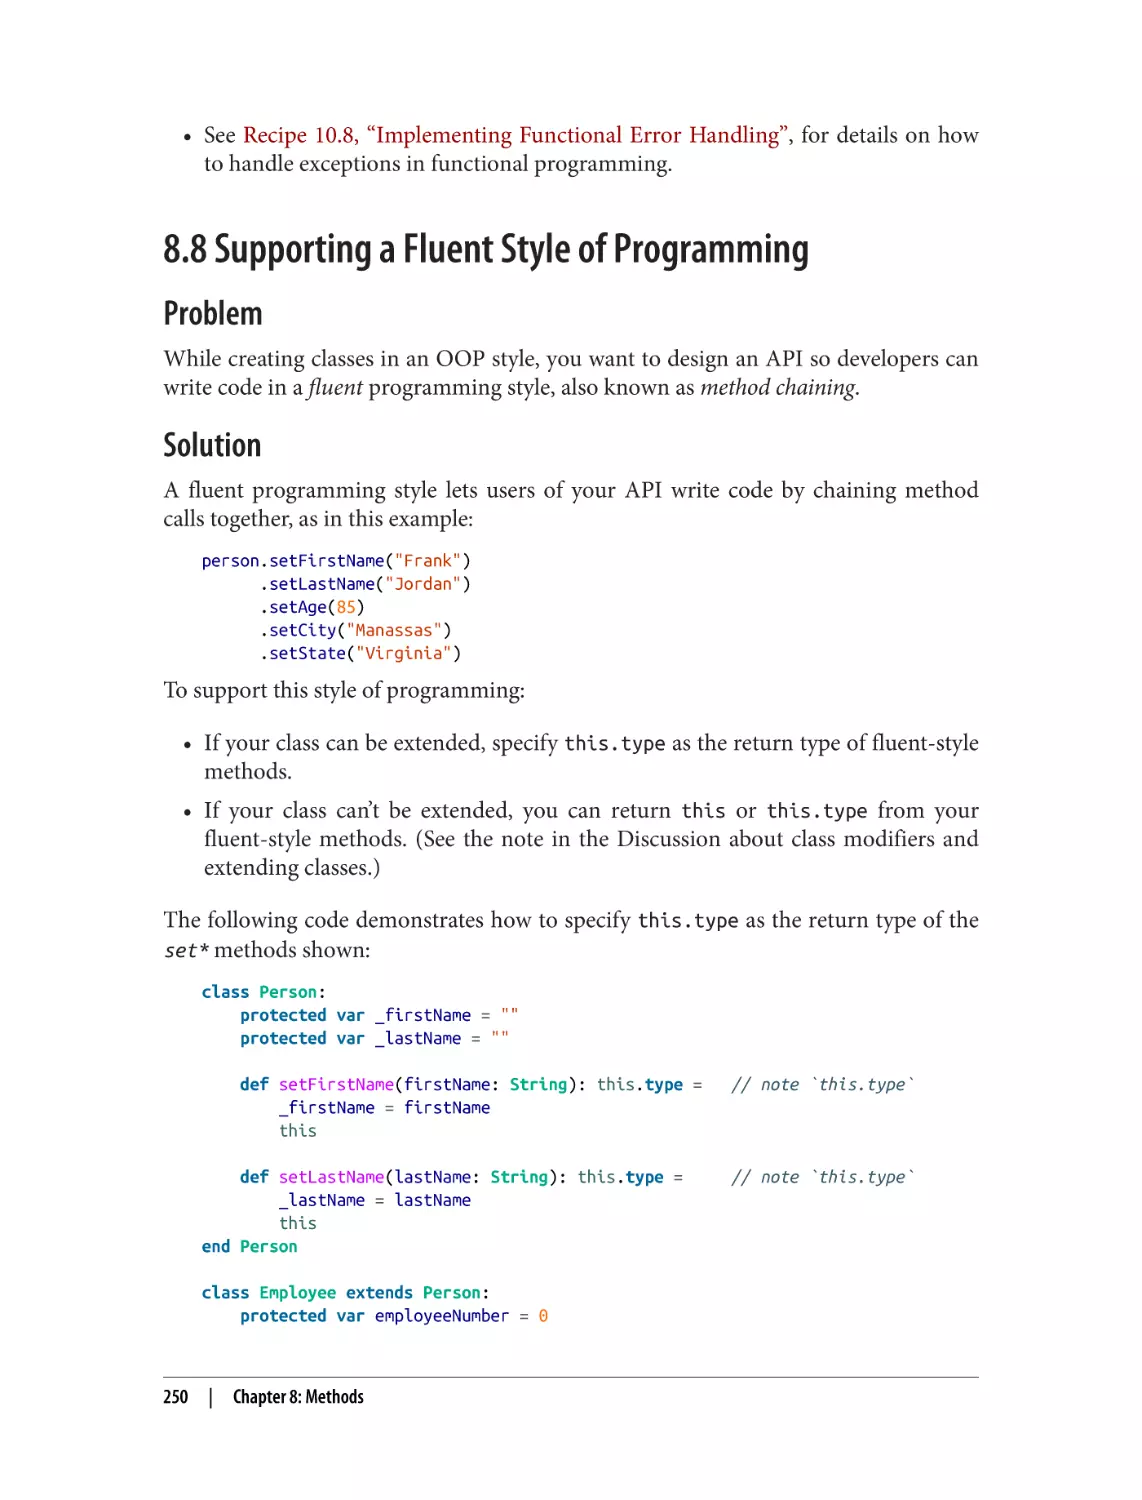 8.8 Supporting a Fluent Style of Programming
Problem
Solution